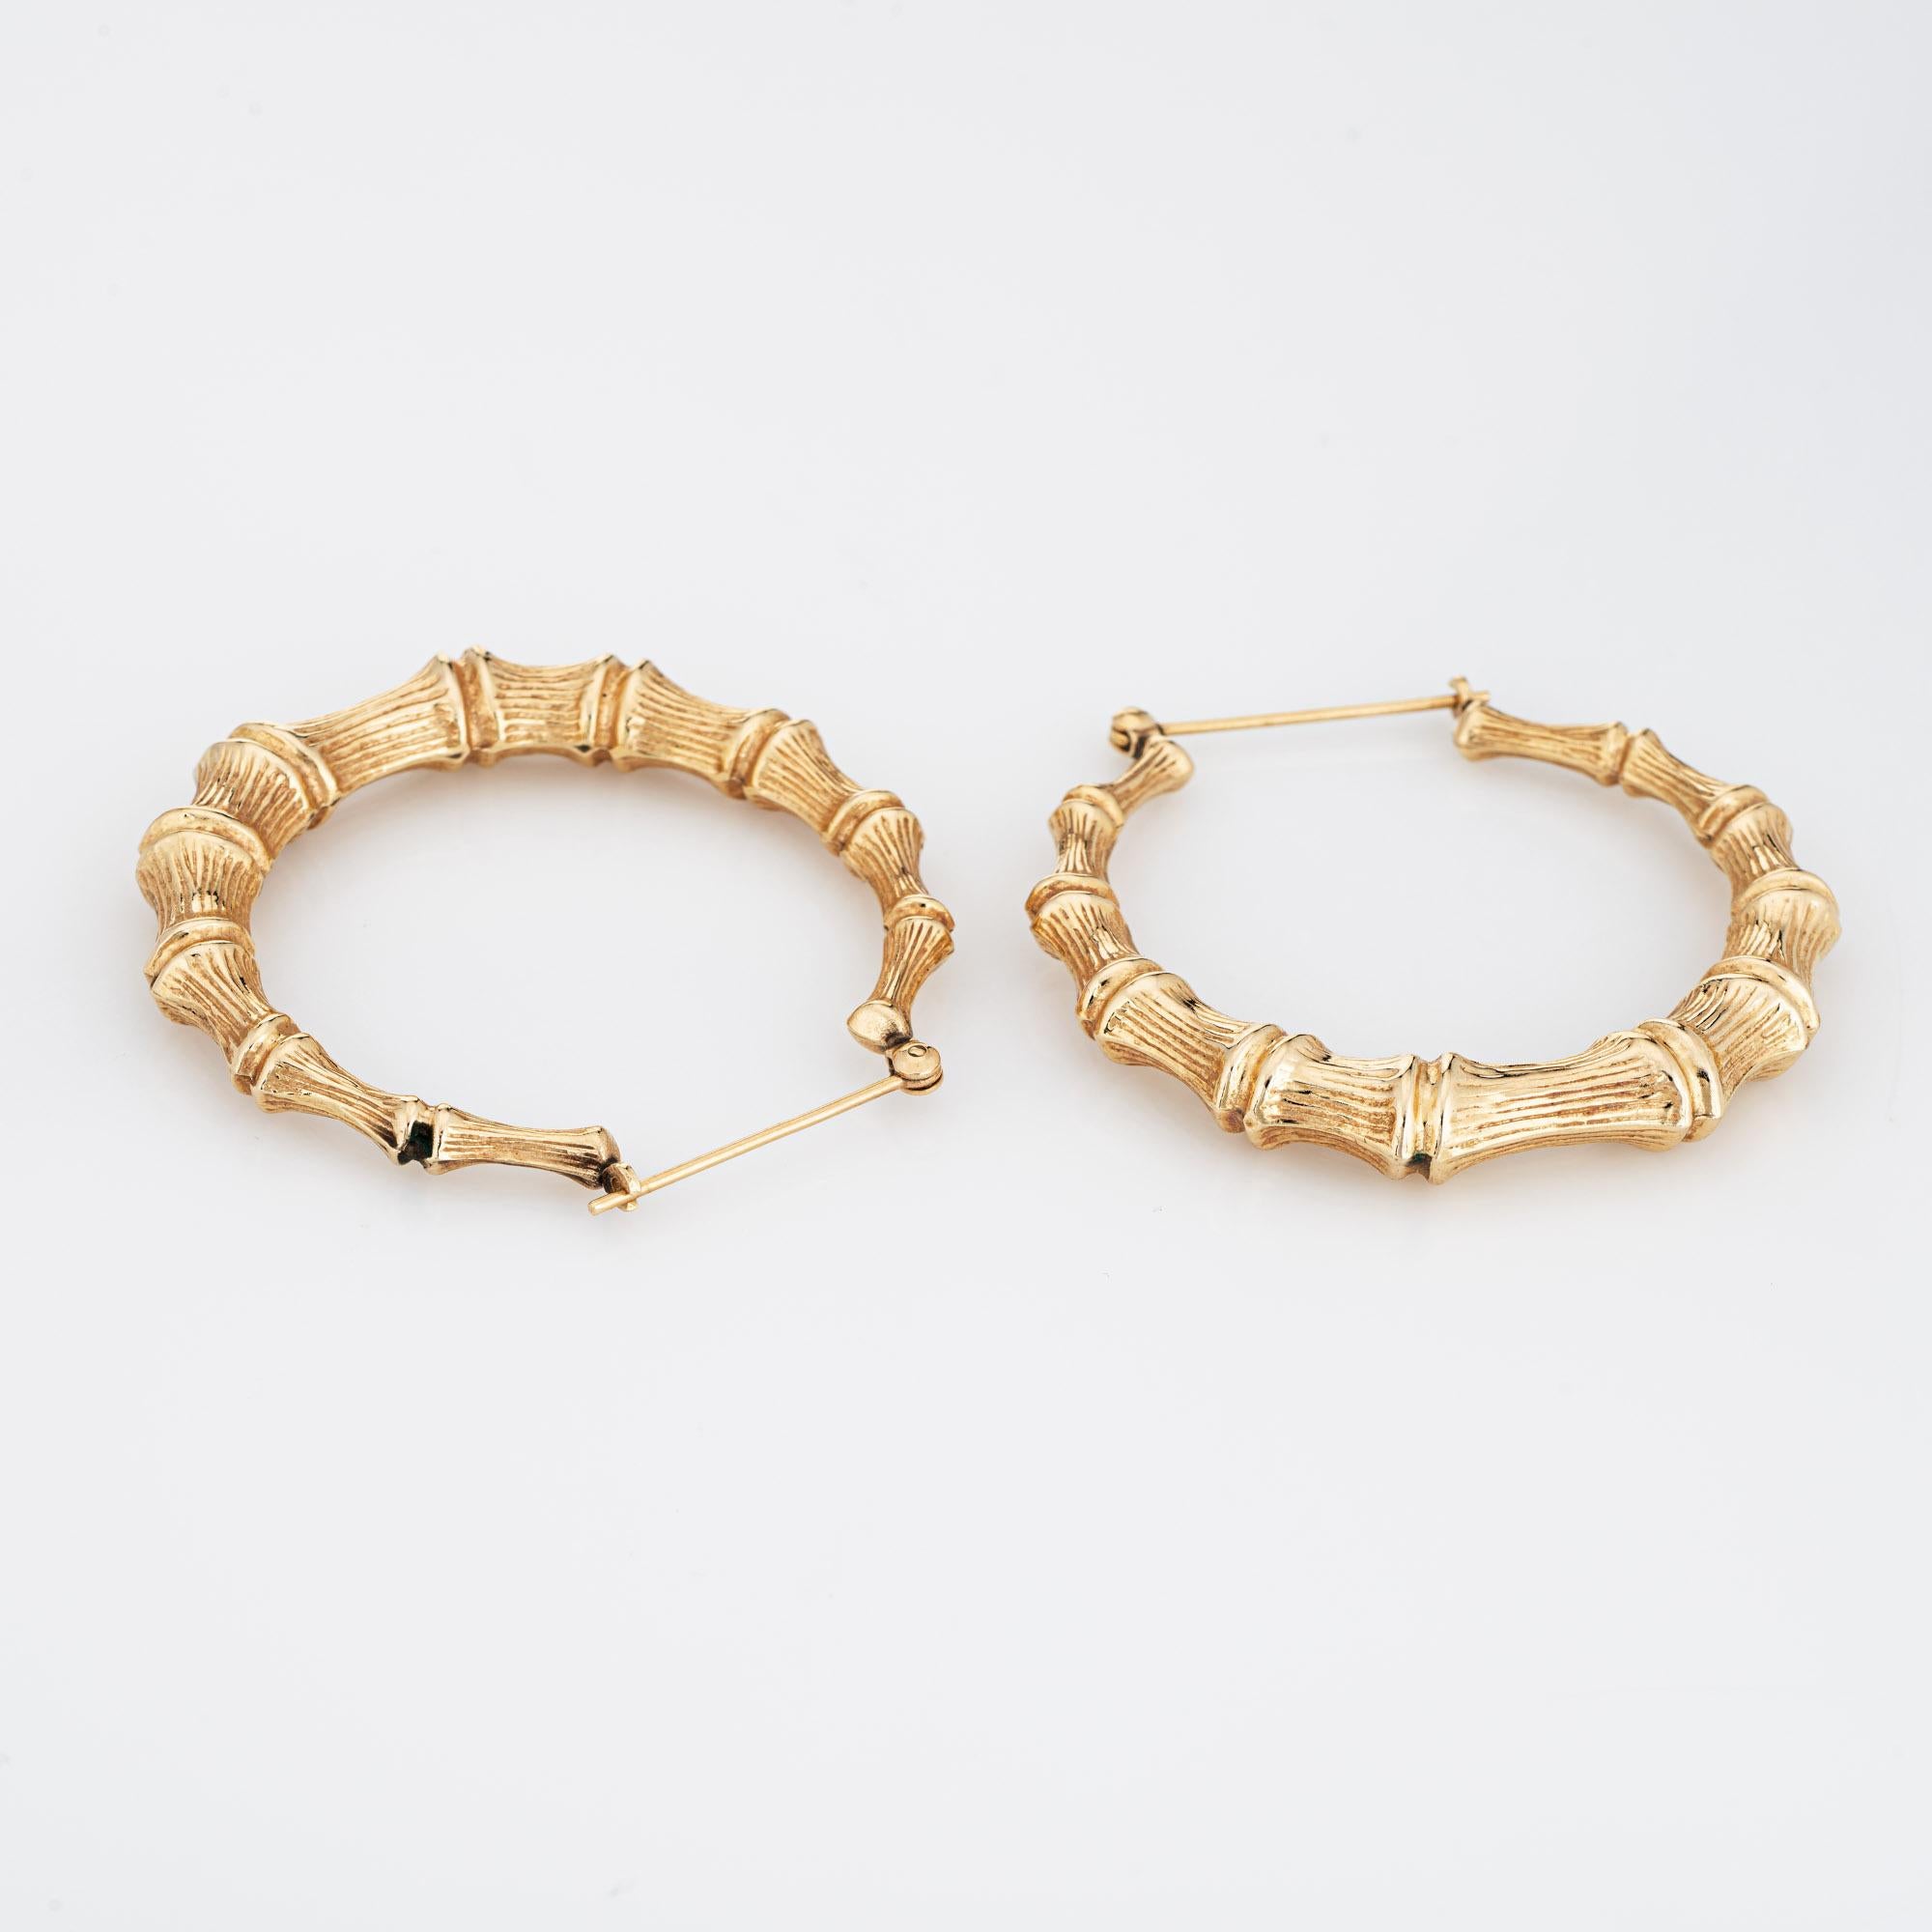 Finely detailed pair of vintage large bamboo earrings crafted in 14k yellow gold. 

The stylish earrings feature a textured bamboo design. Large in scale at 1 1/2 inches, the earrings make a nice statement on the earlobe. The earrings are fitted